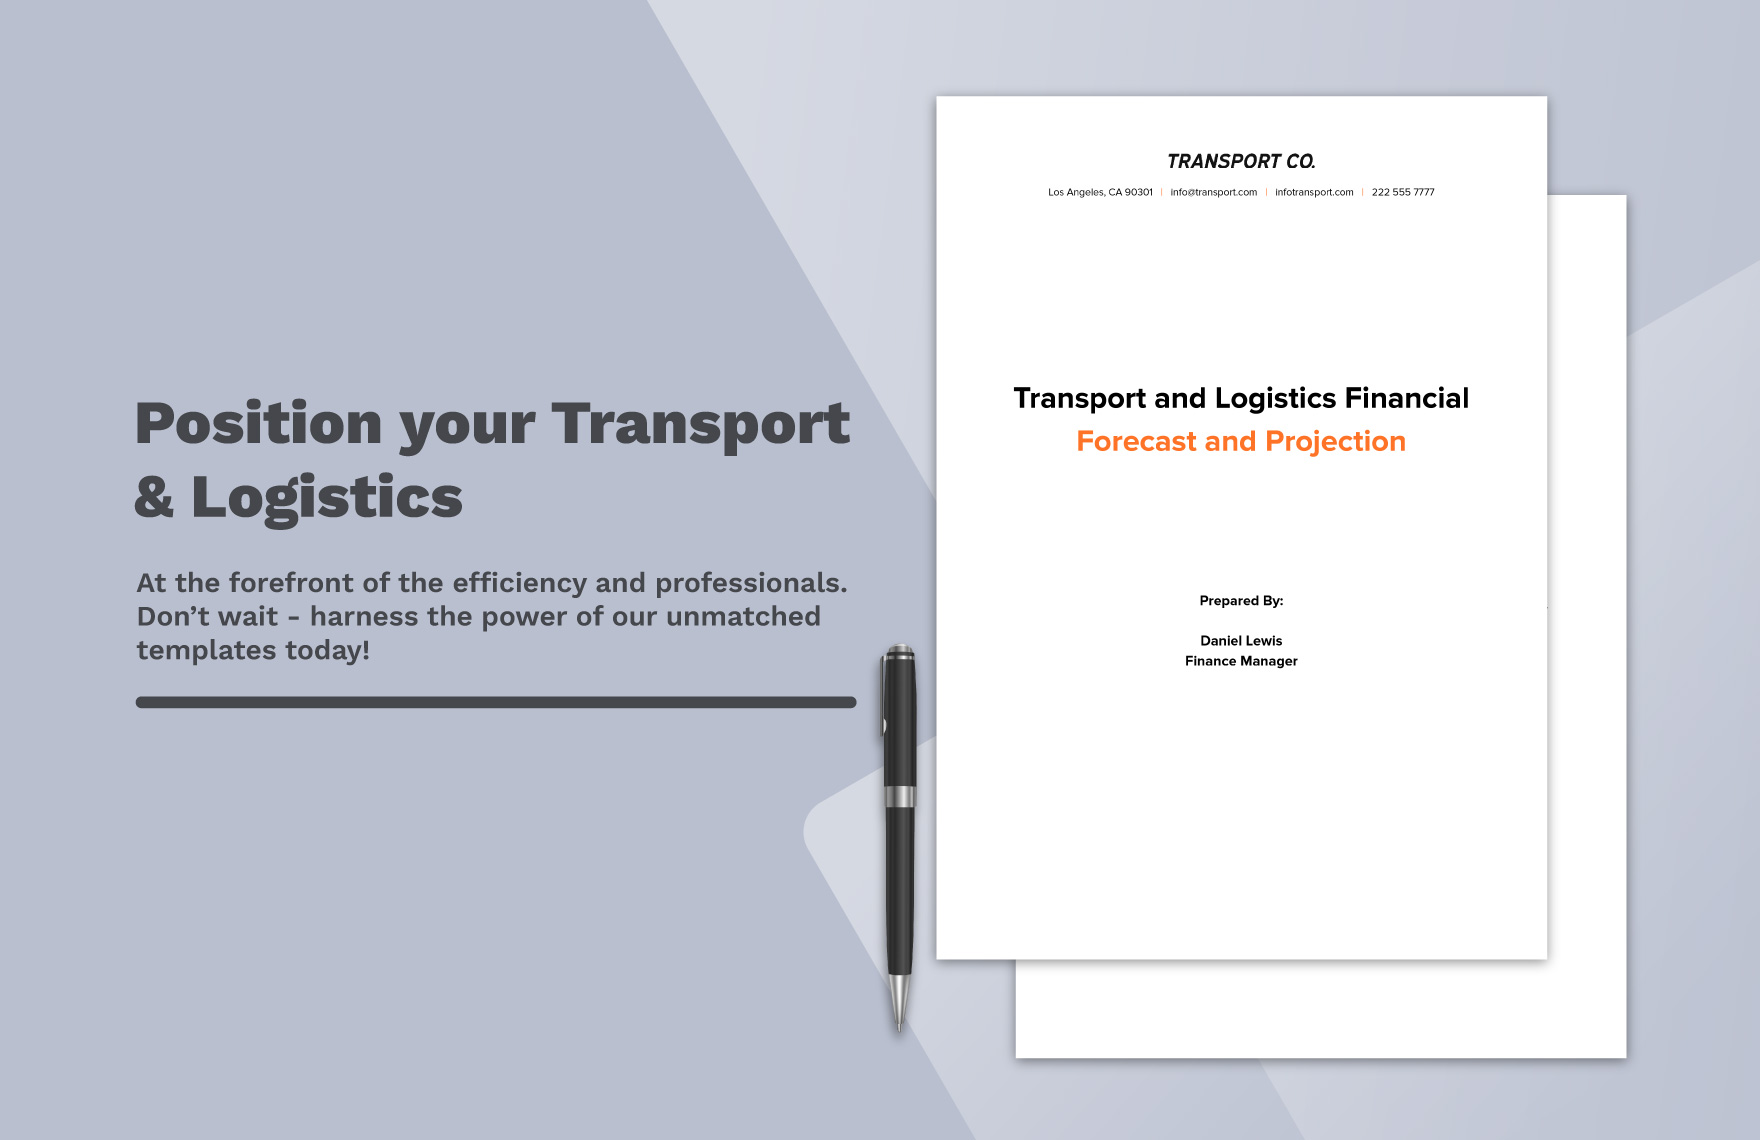 Transport and Logistics Financial Forecast and Projection Template